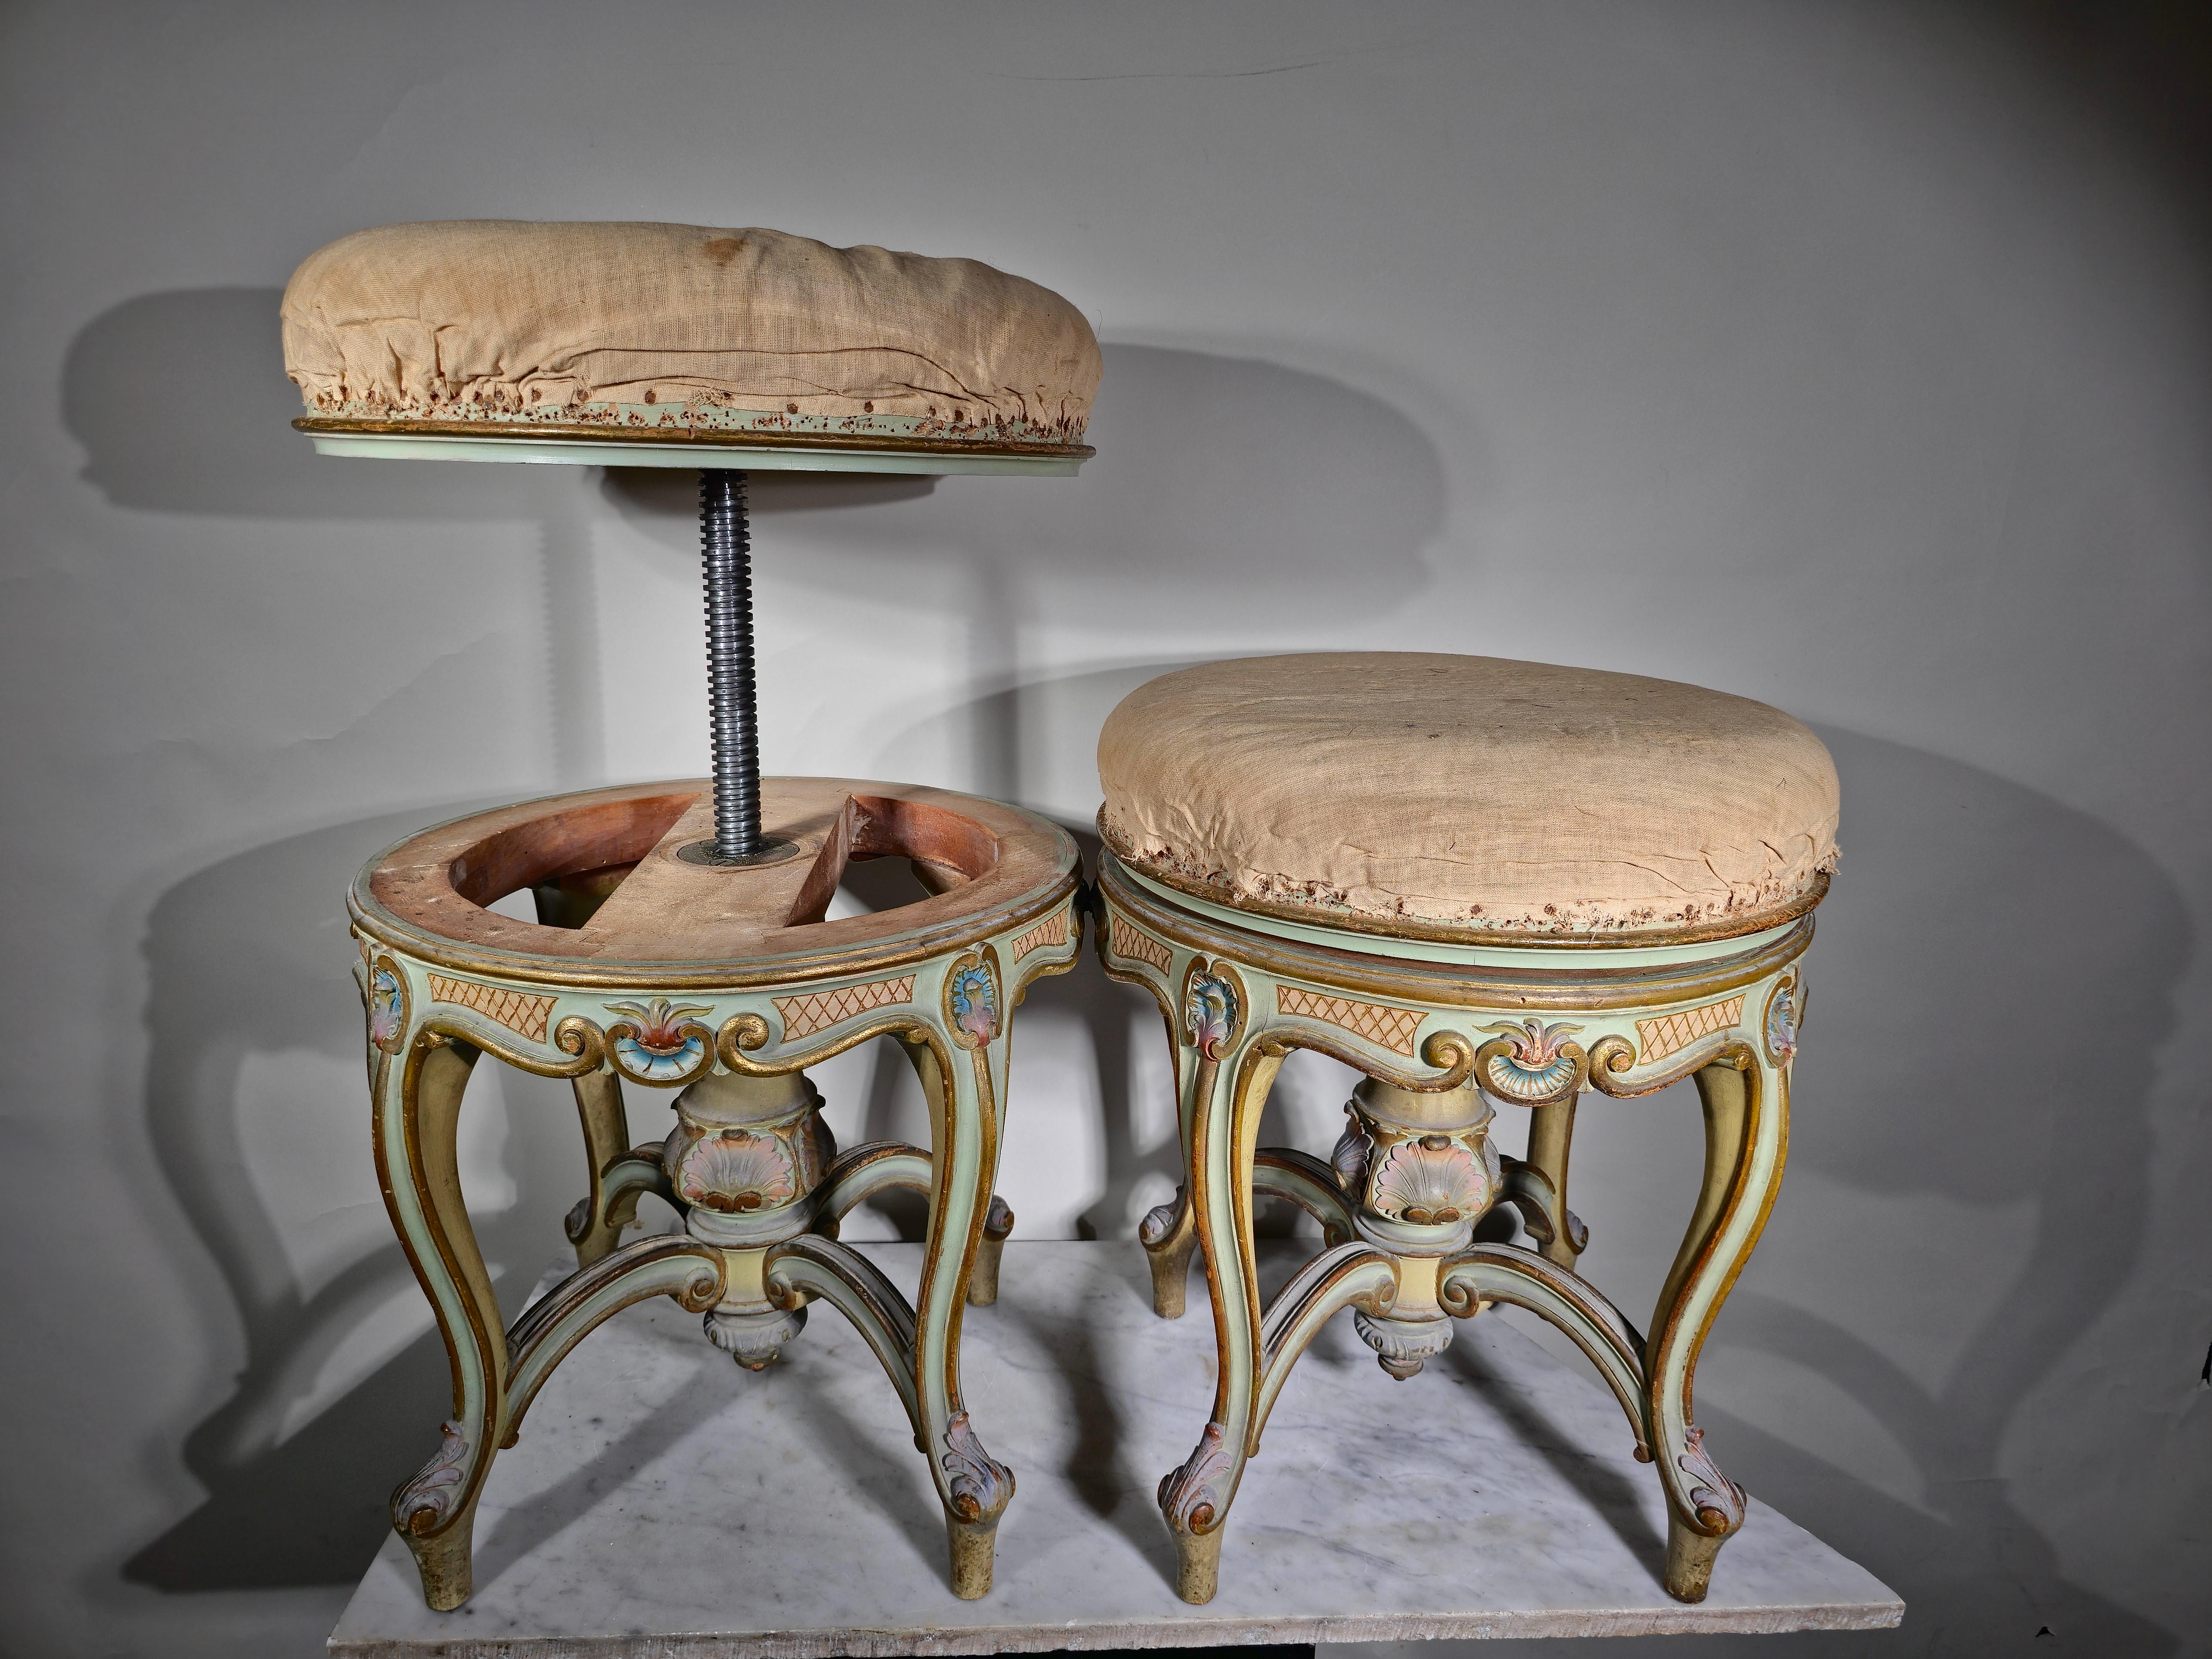 Enhance your living space with this captivating pair of Italian-Venetian stools from the 19th century. These stools, with differing heights, retain their original hand-painted designs, adding an intriguing touch of history and artistry to your